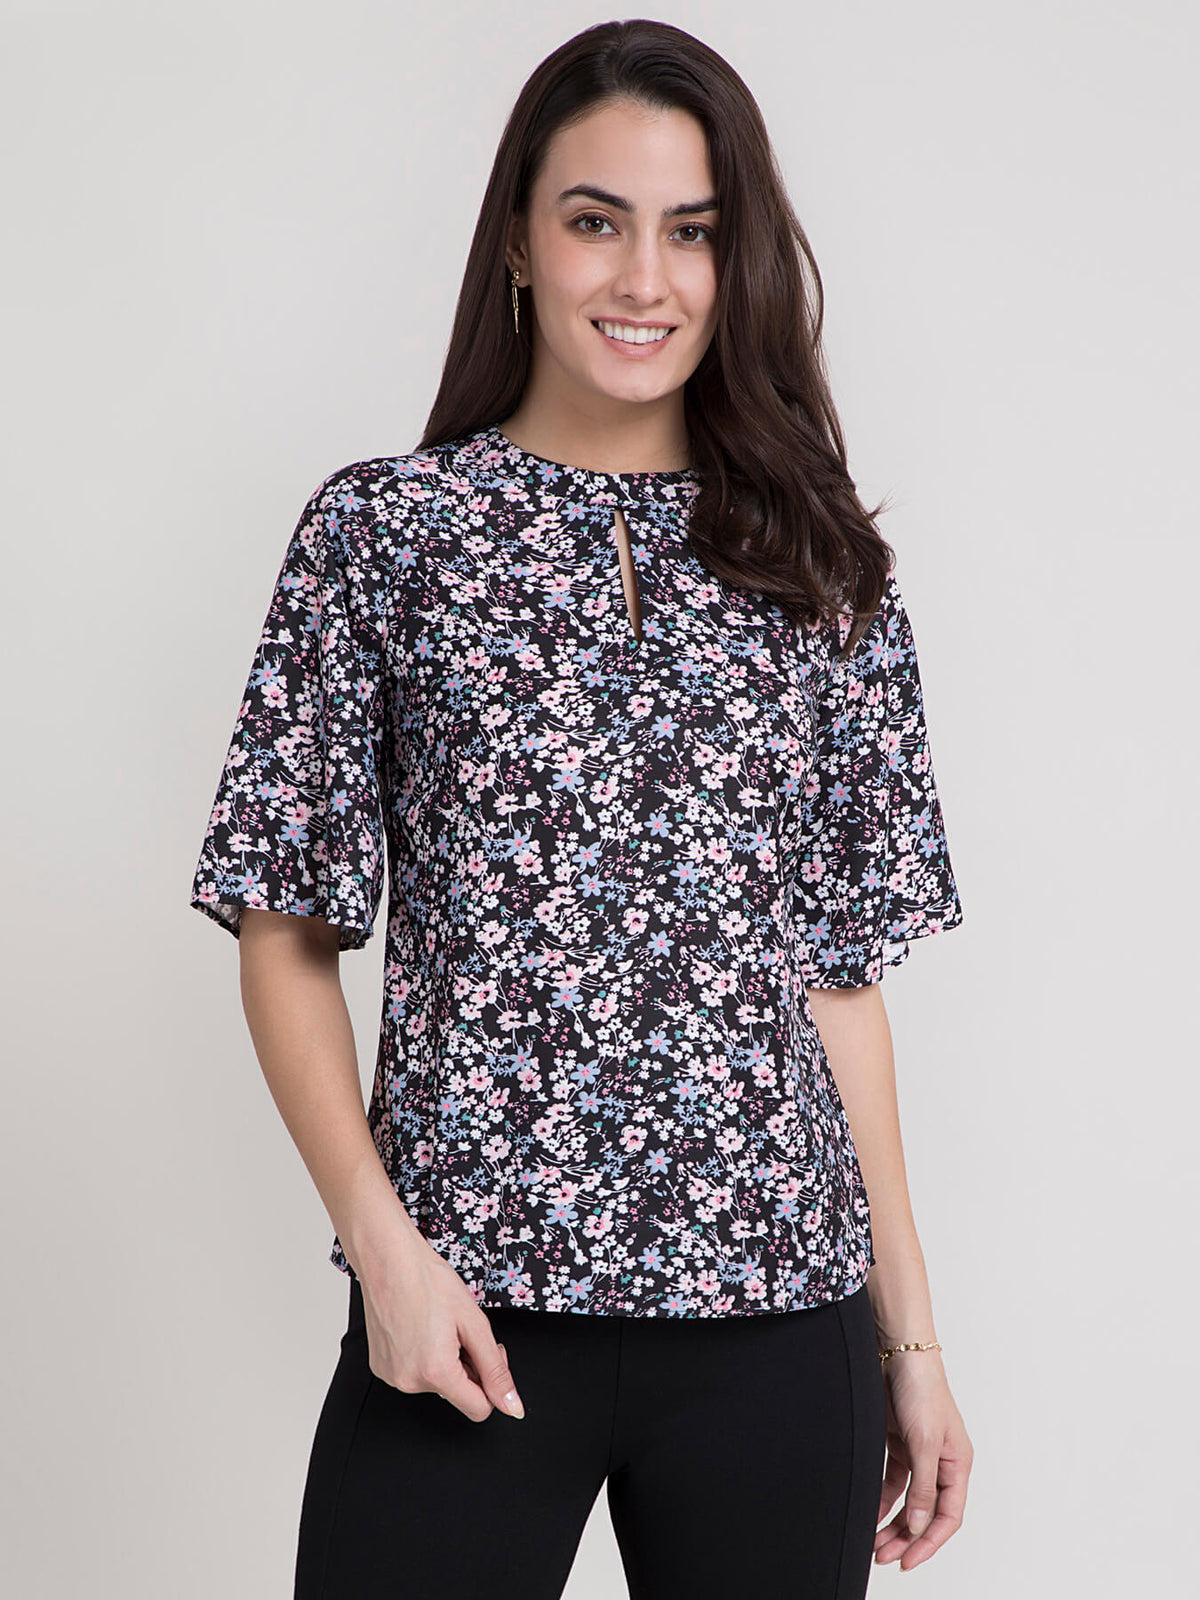 Ditsy Floral Round Neck Top - Black and Pink